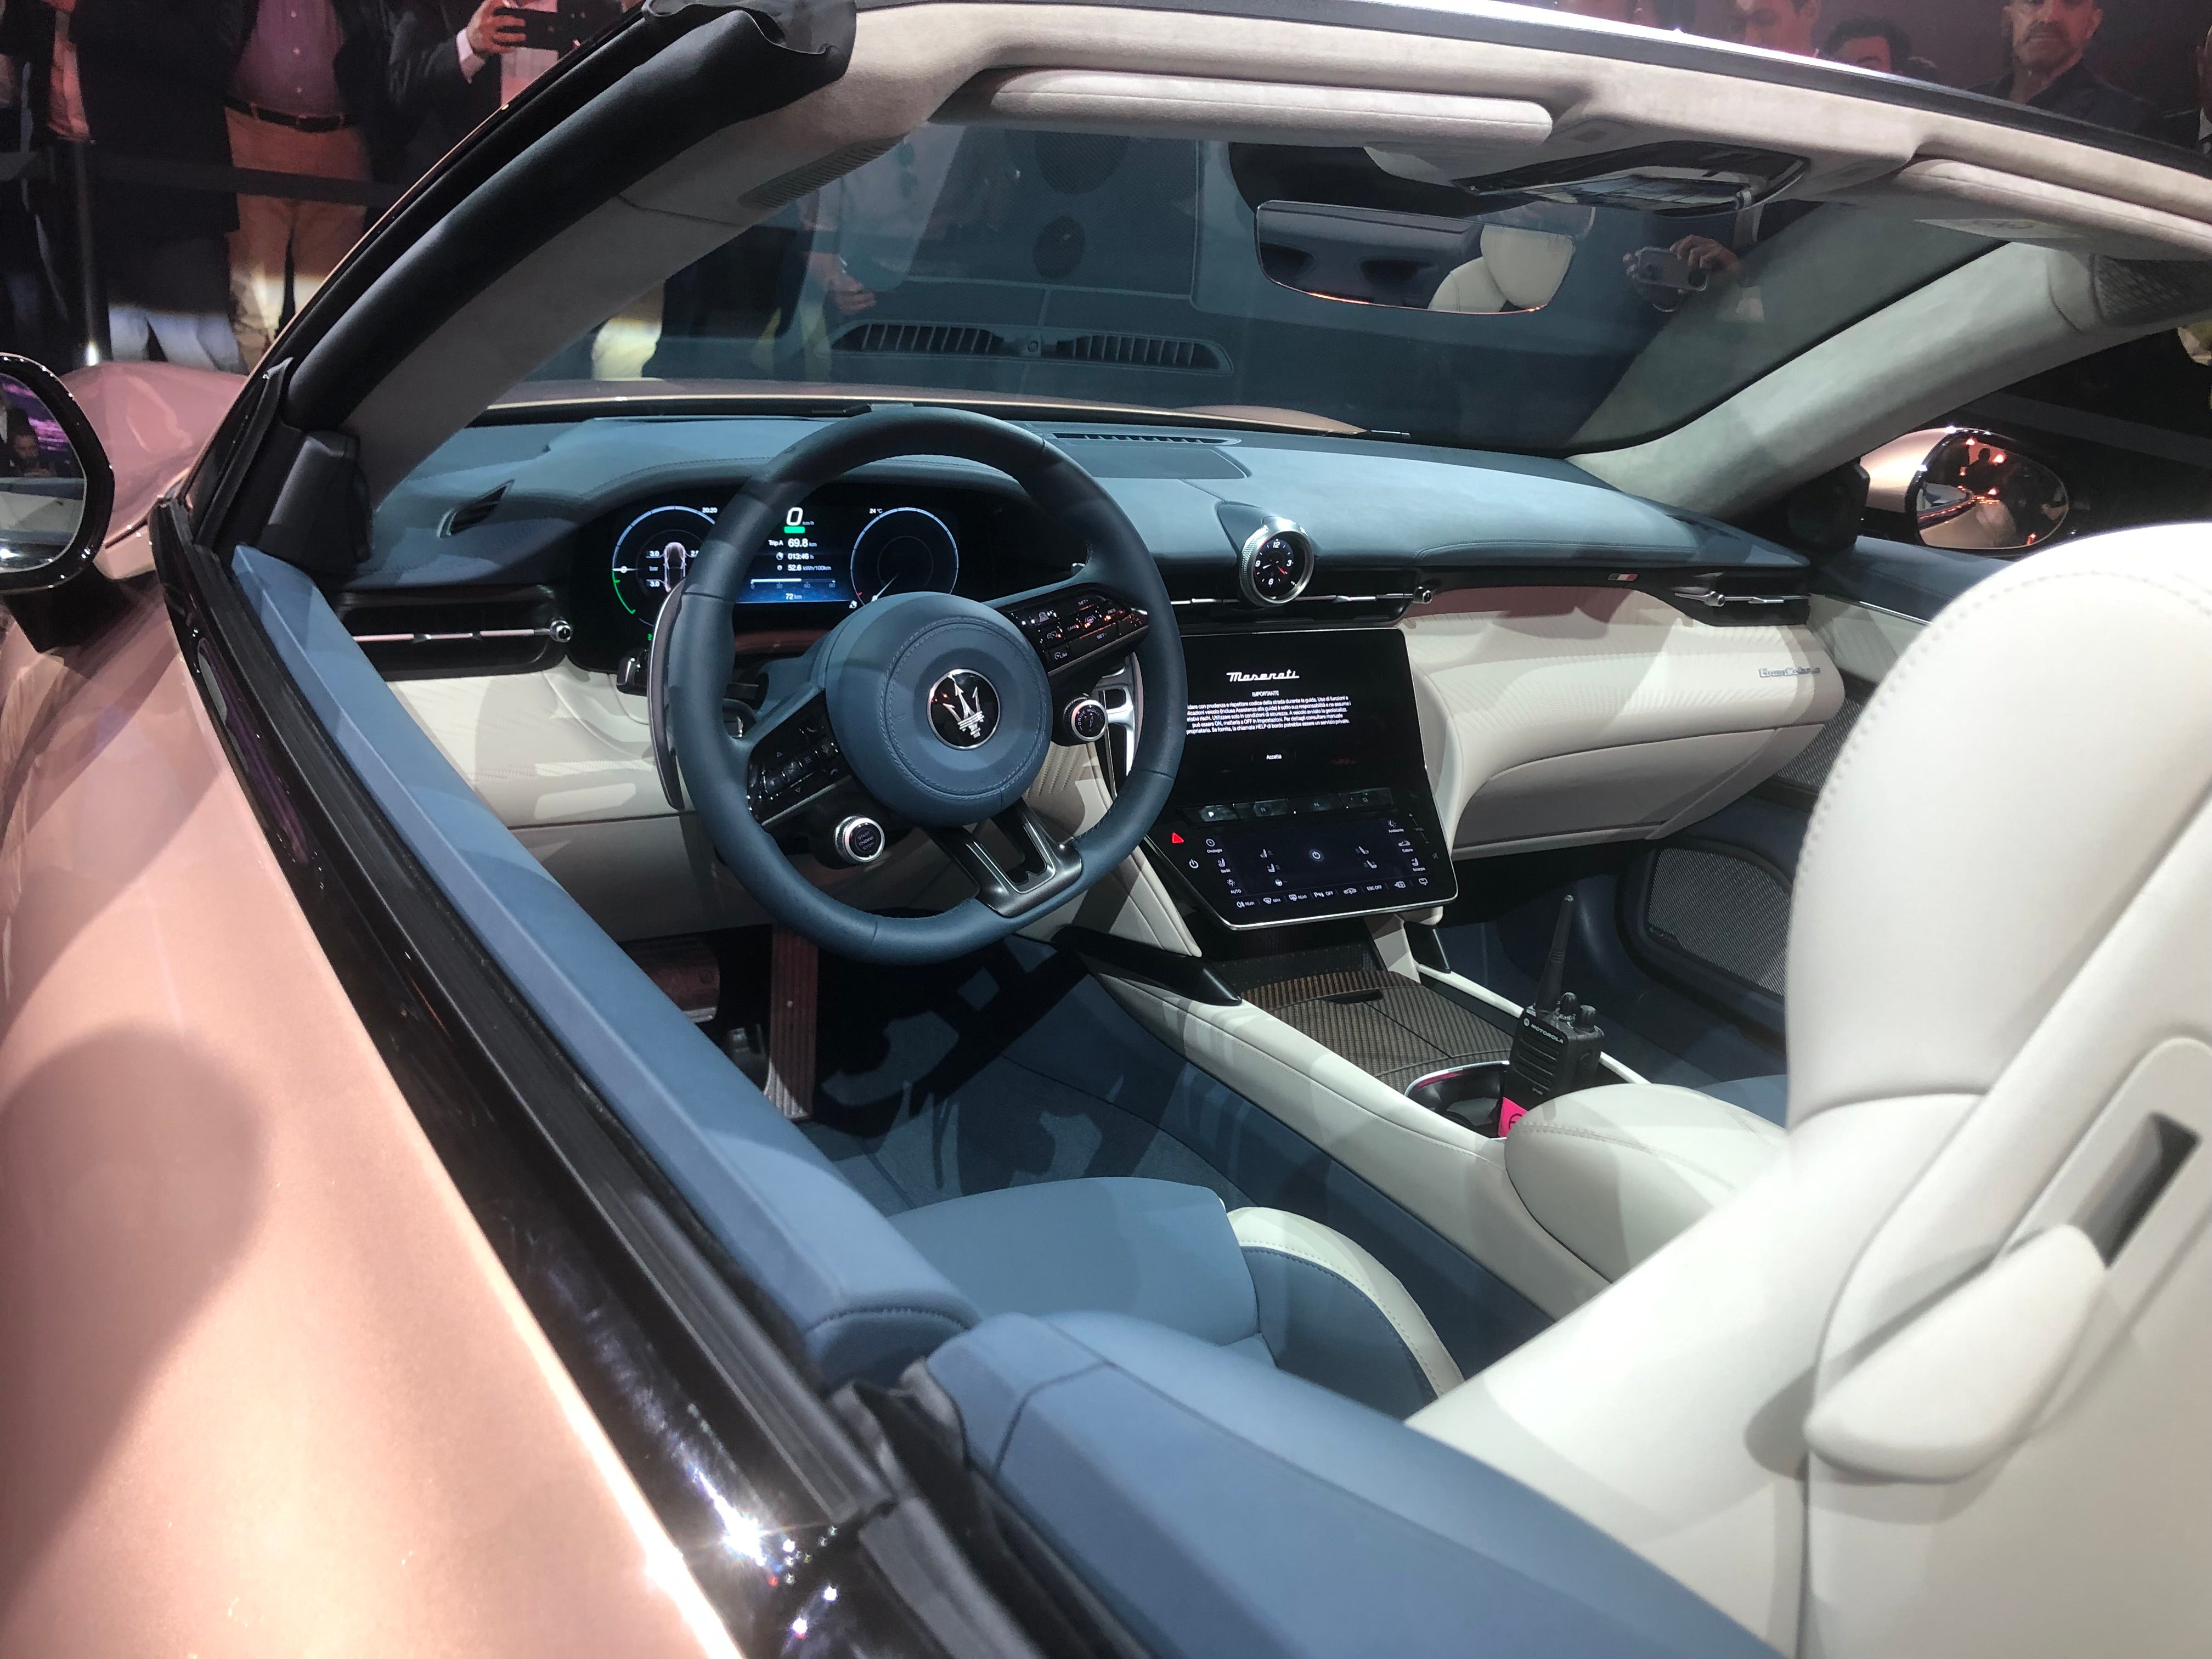 The interior is snug and practical, and two touchscreens are provided for the driver